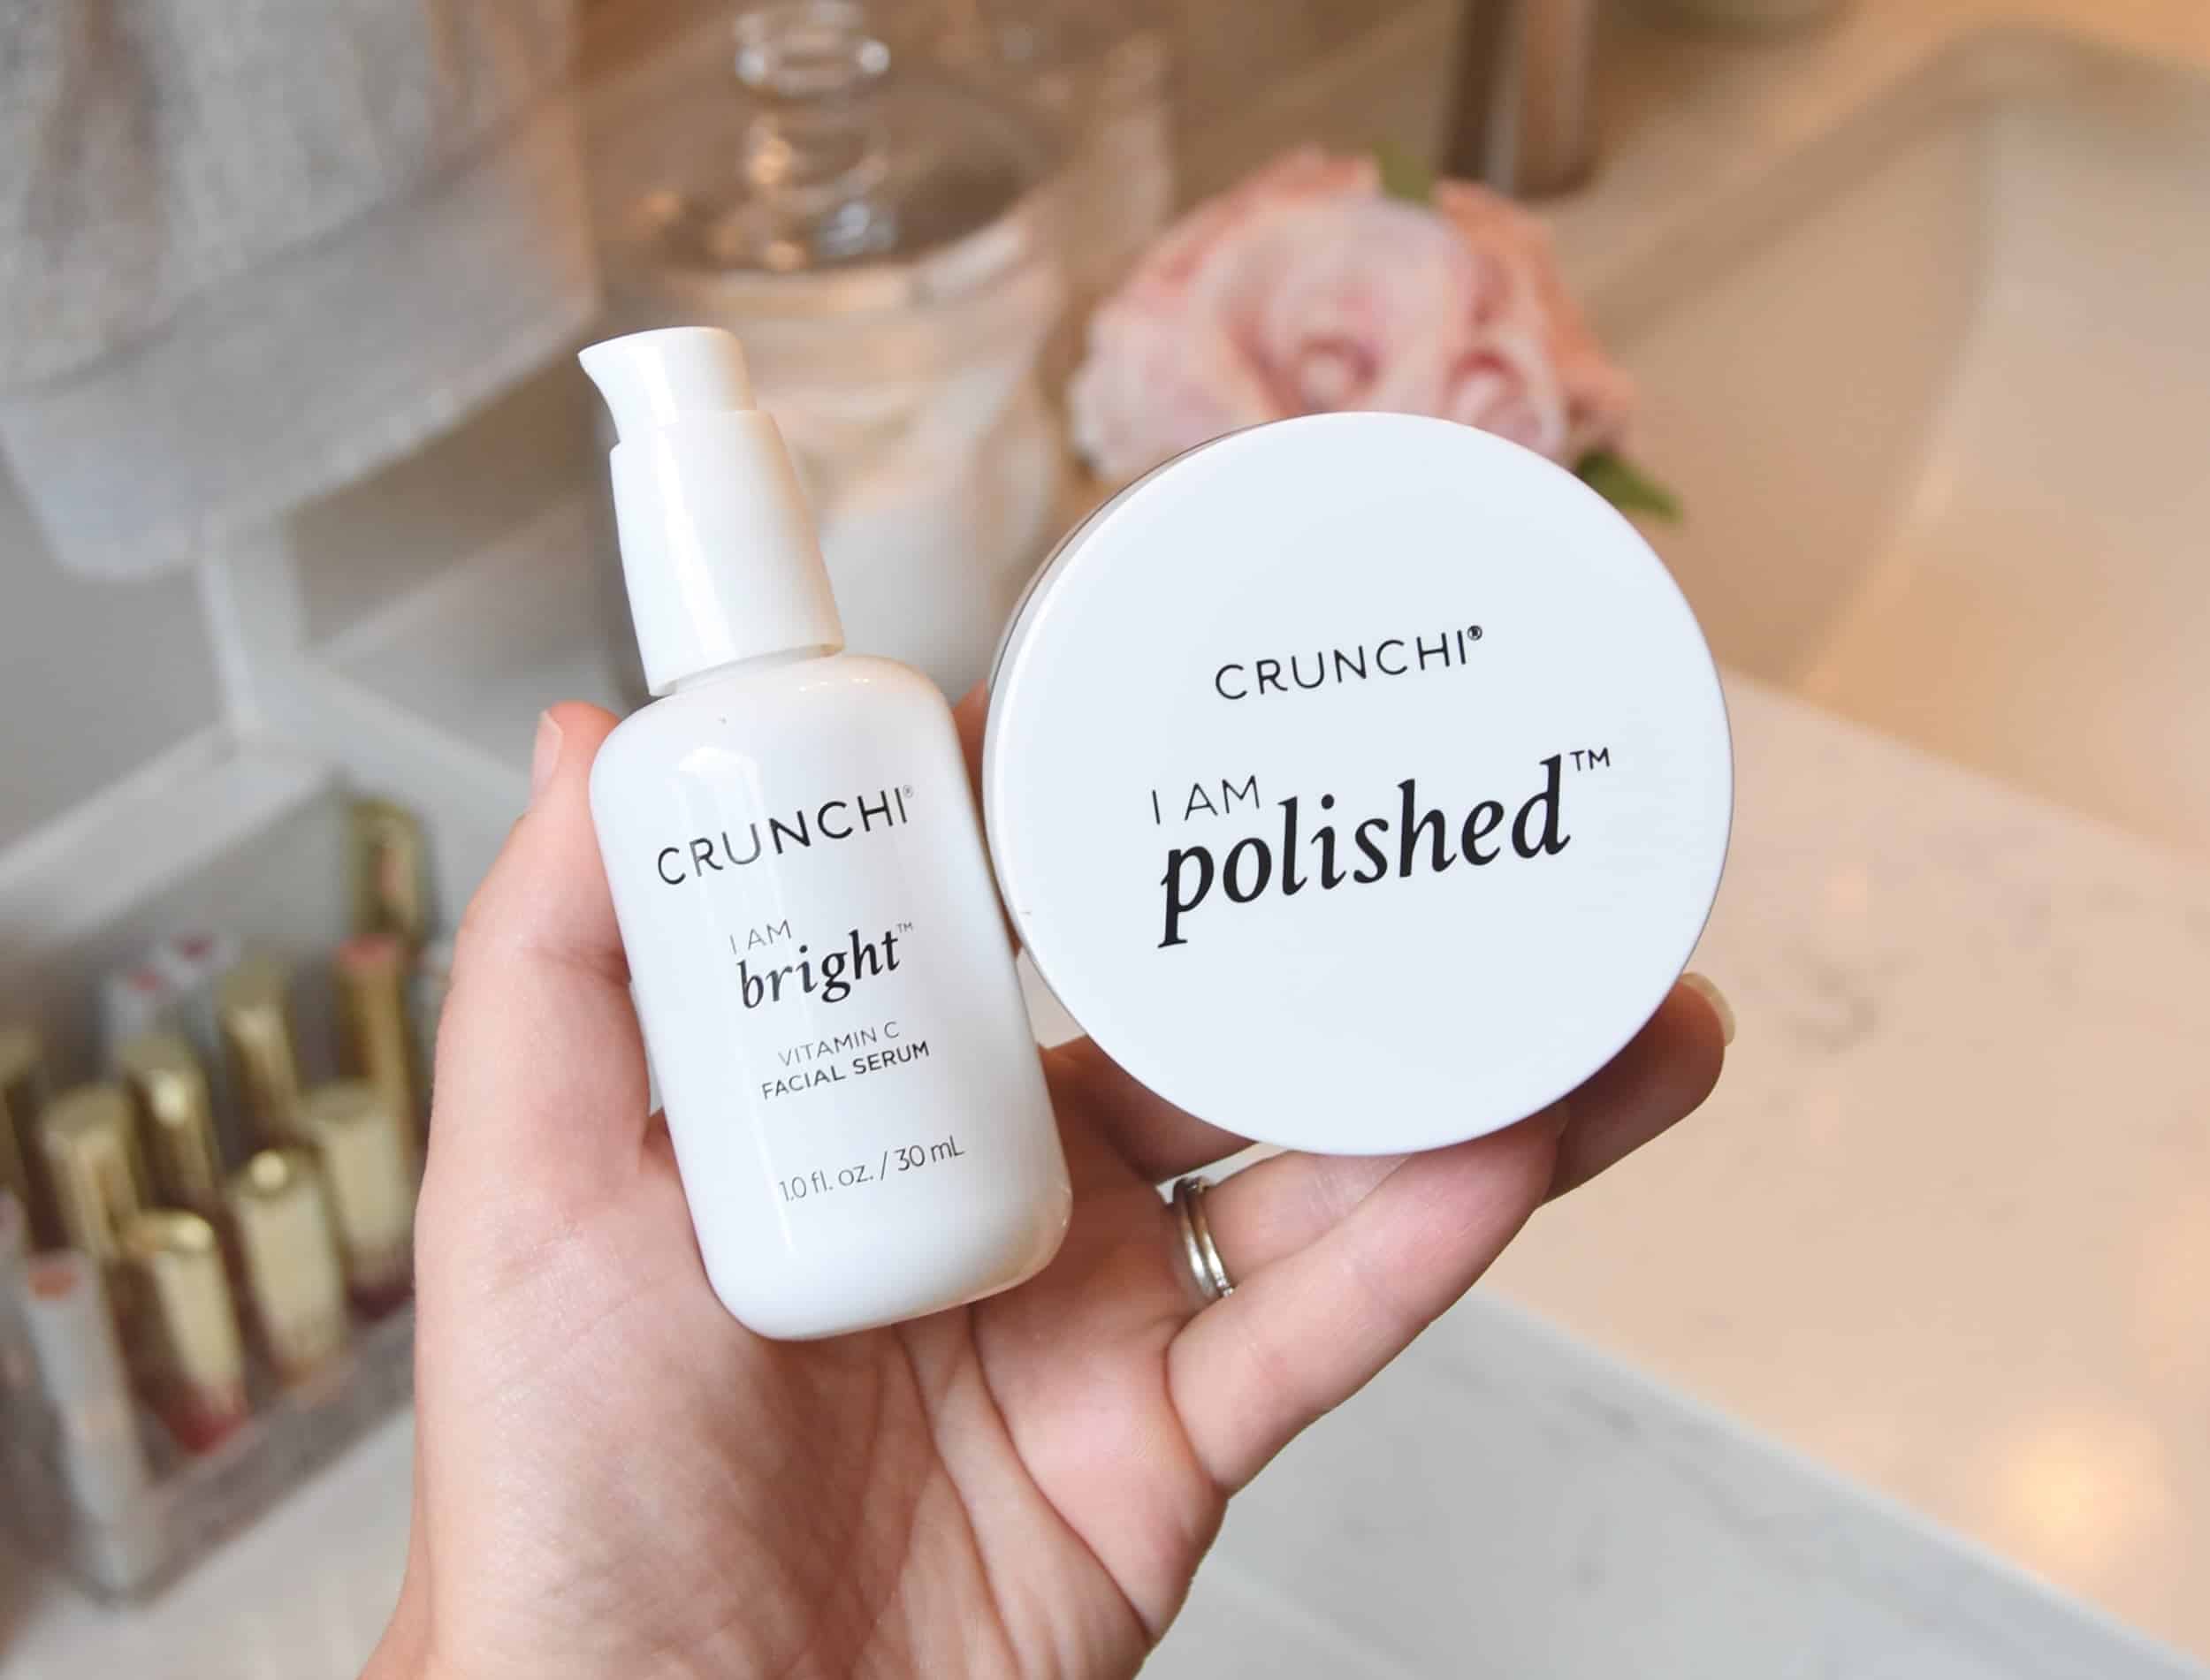 Two new crunchi products that are great alternatives to Beautycounter products. 